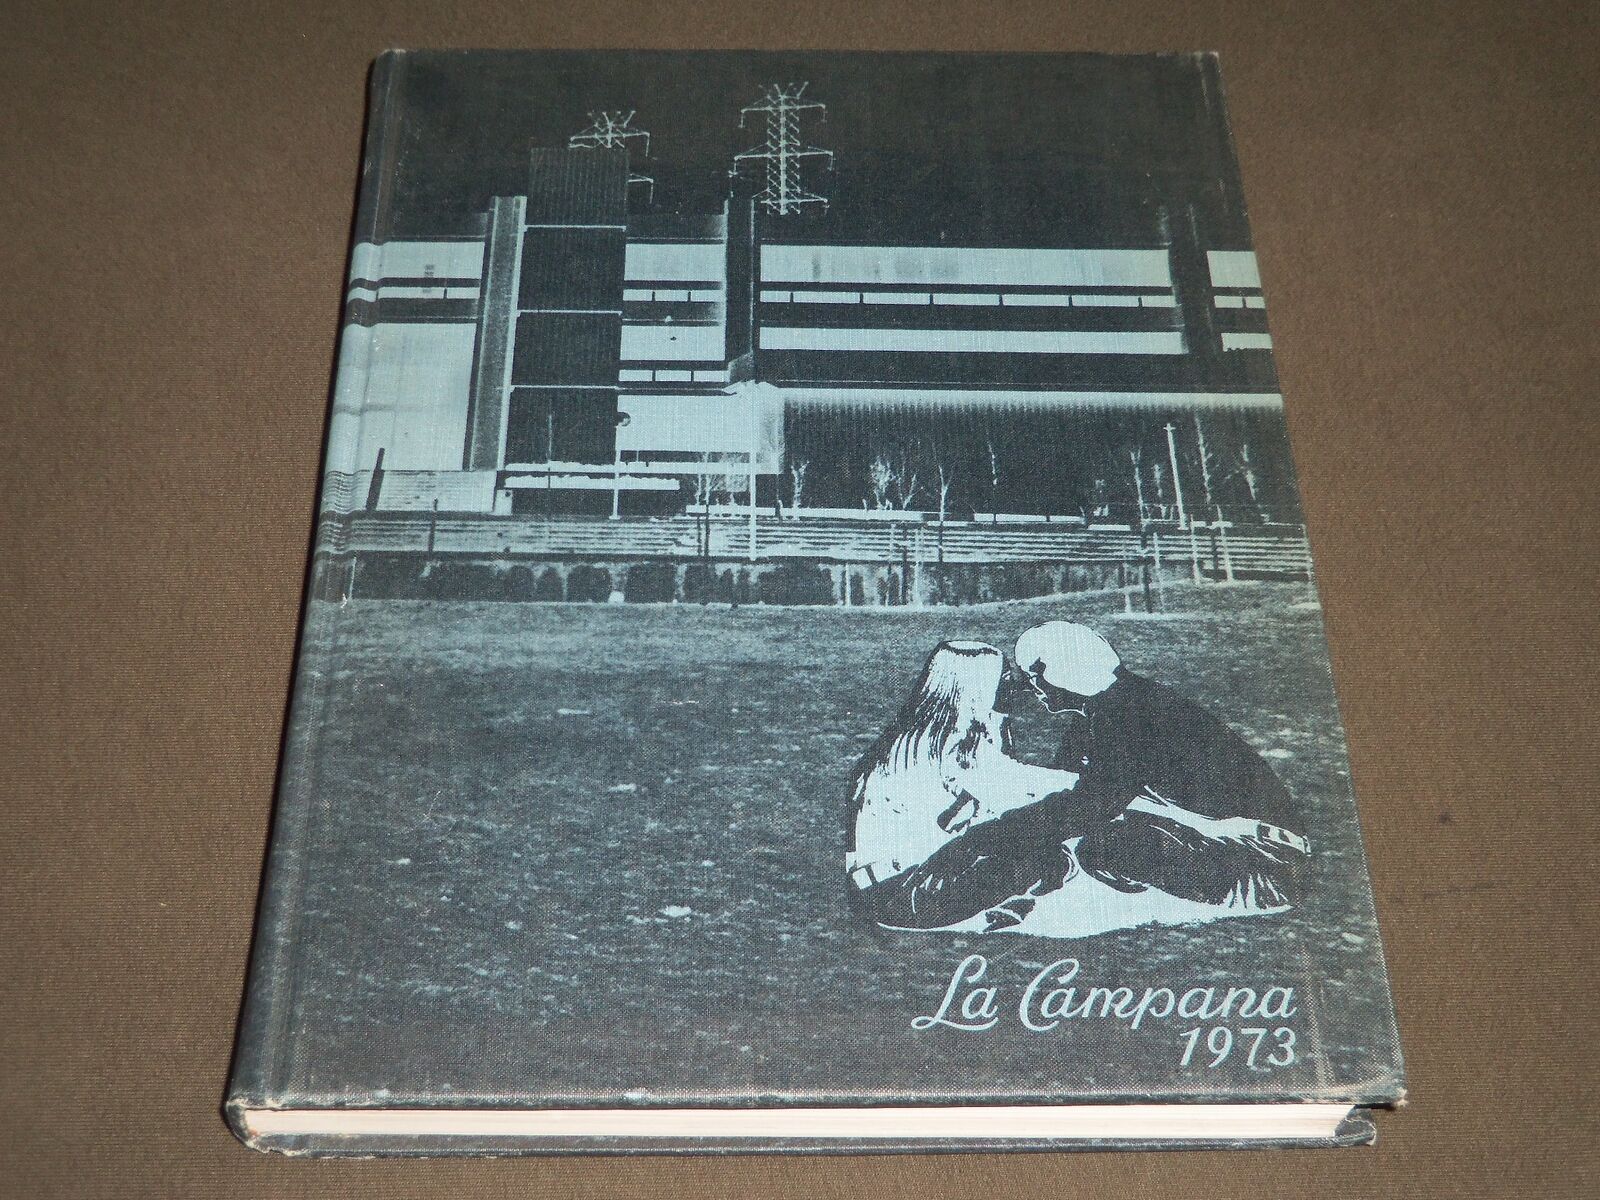 1973 THE LA CAMPANA MONTCLAIR STATE COLLEGE YEARBOOK - NEW JERSEY - YB 1074